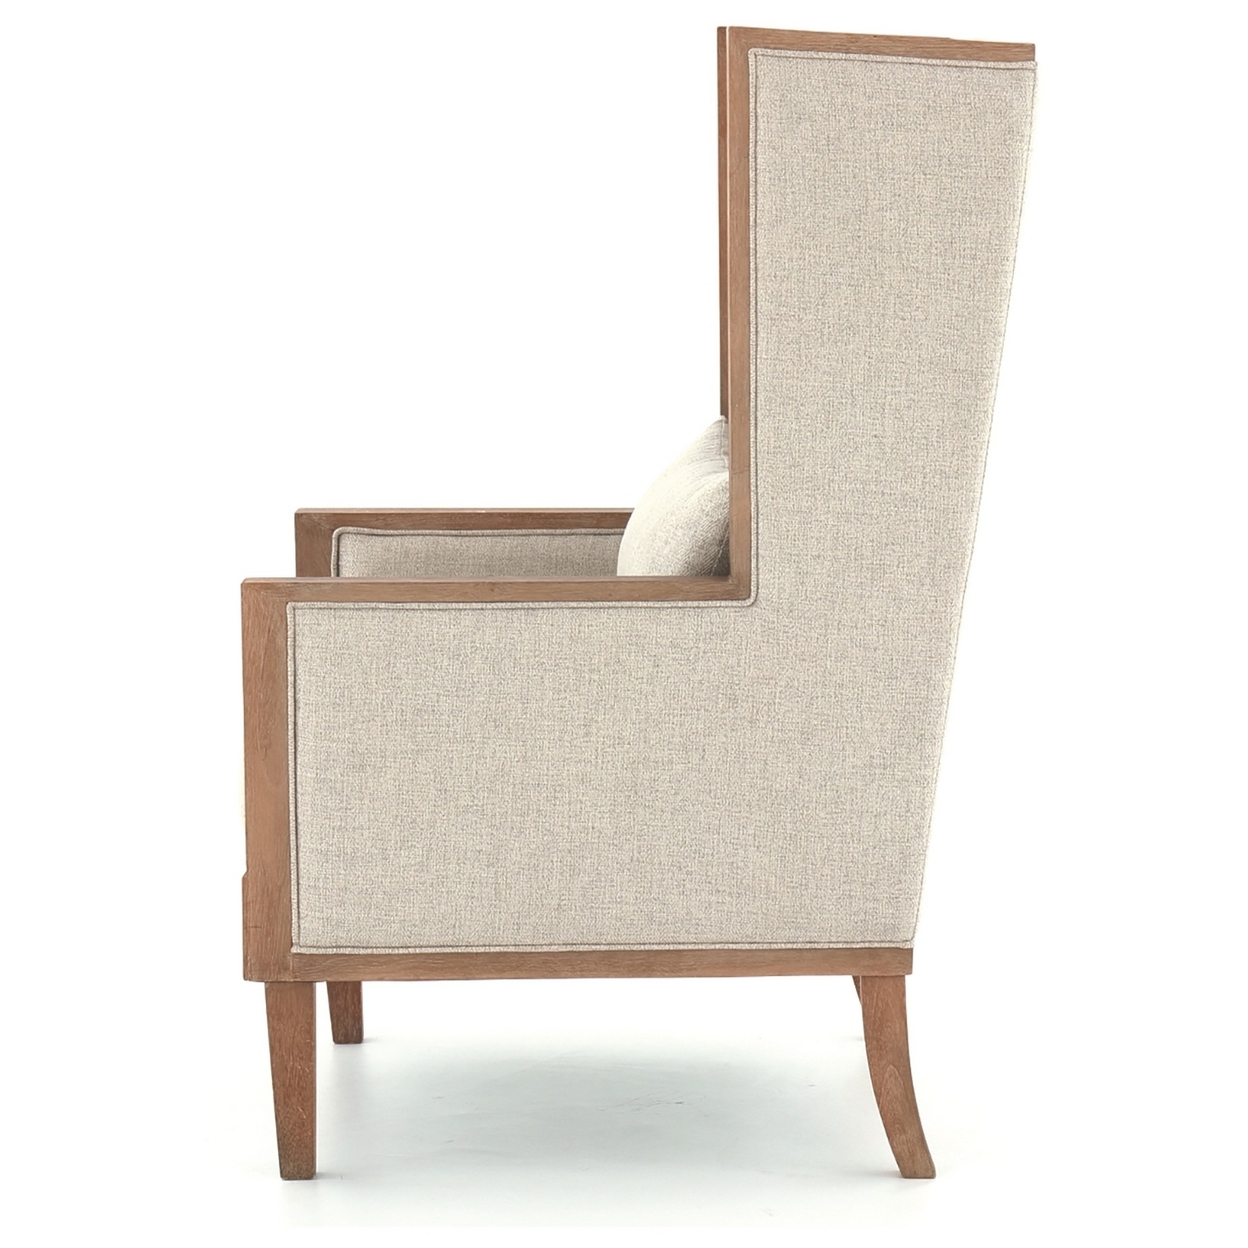 Wooden Frame Accent Chair With High Wingback And Track Arms,Beige And Brown- Saltoro Sherpi